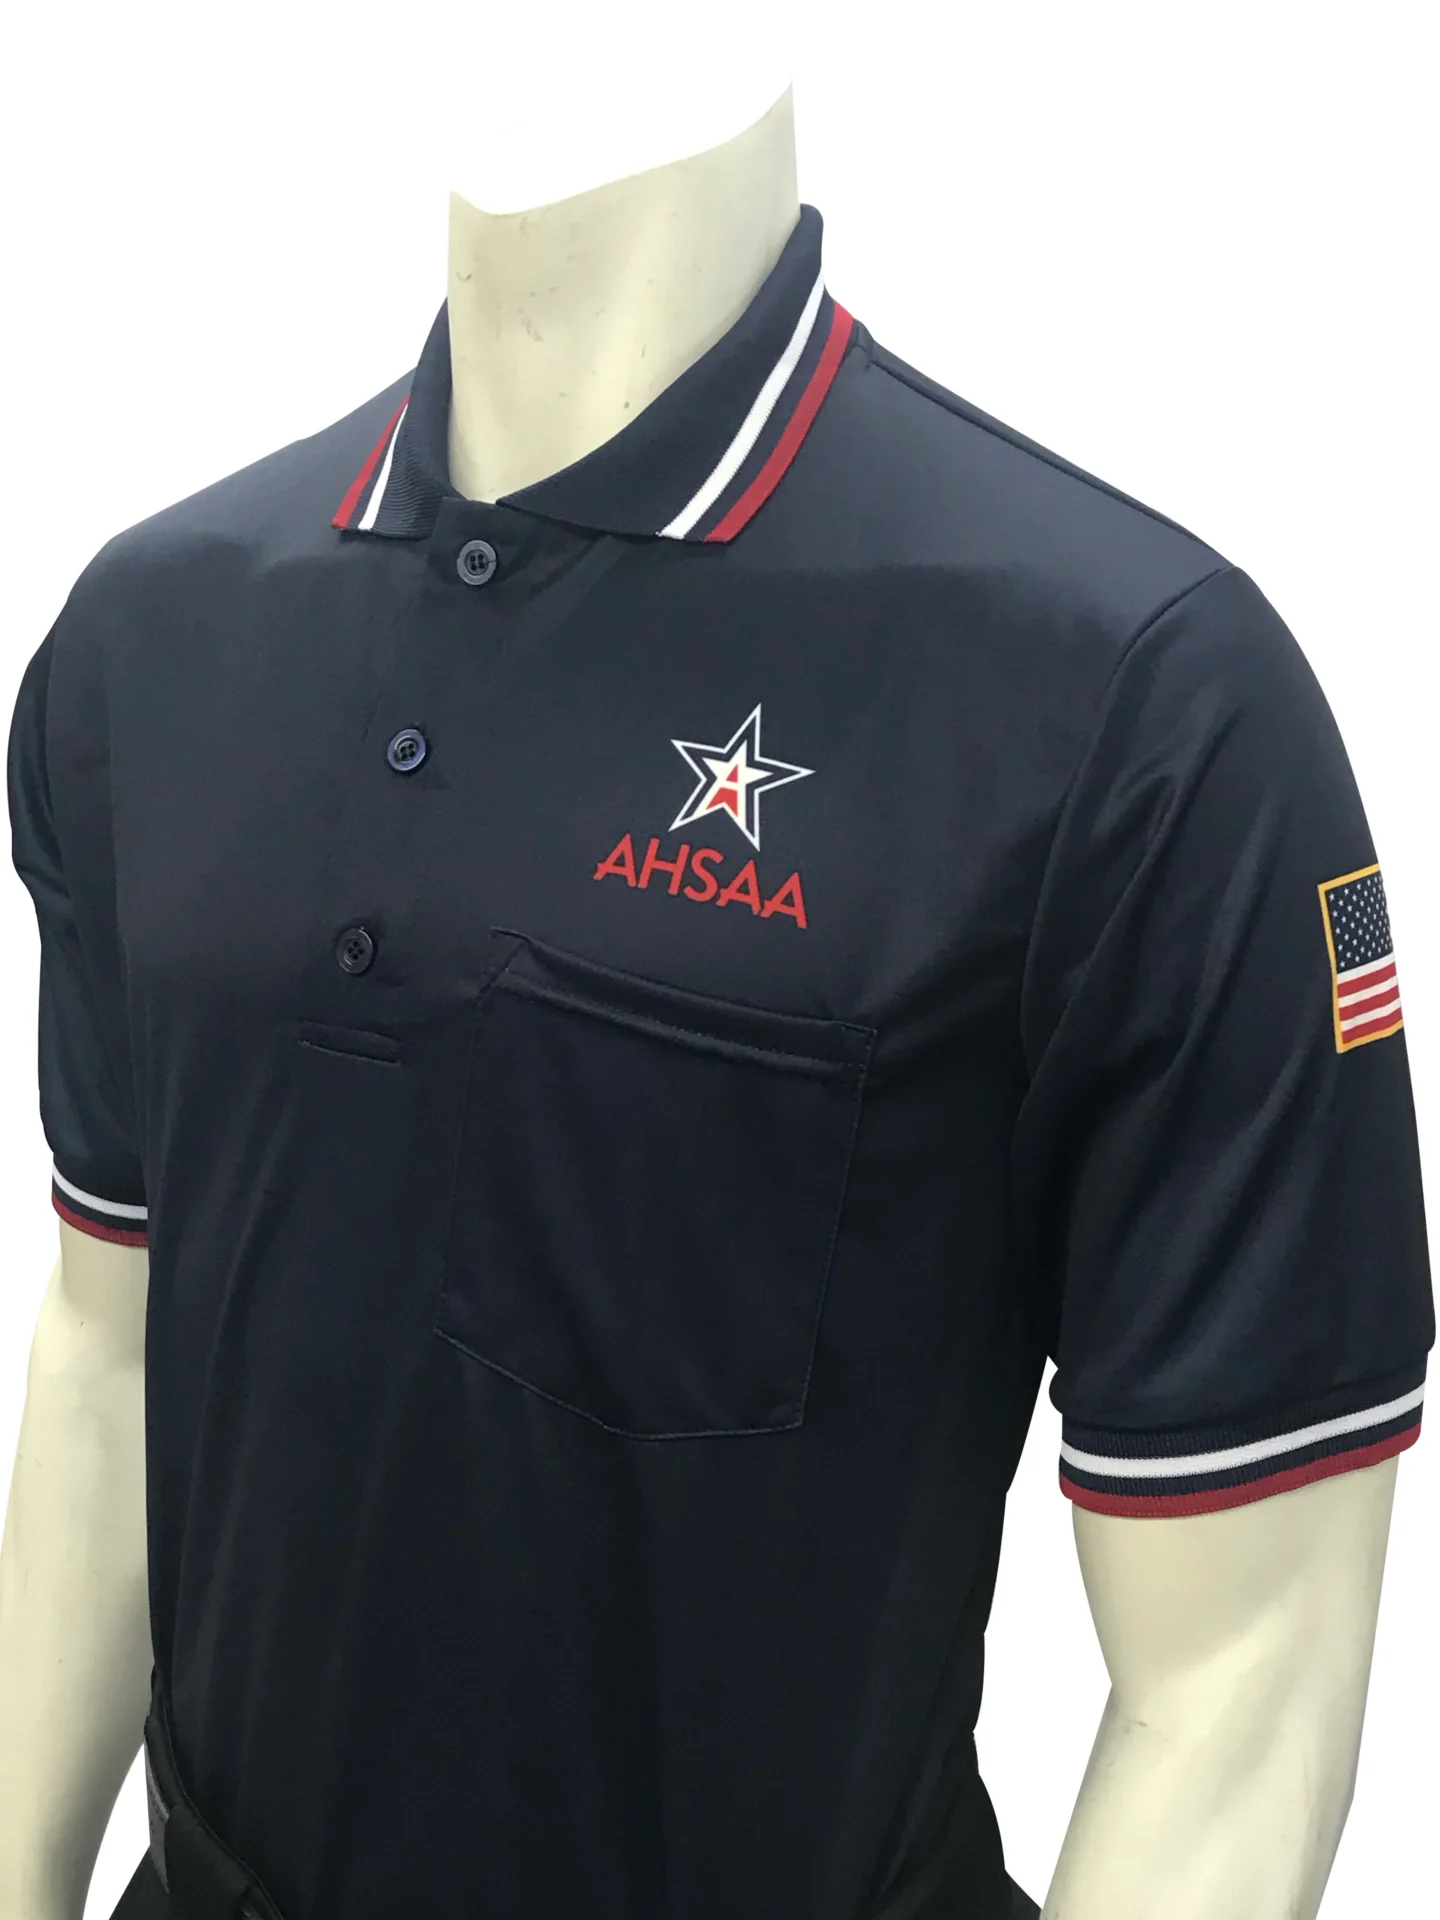 A black umpire shirt with an american flag on the sleeve.